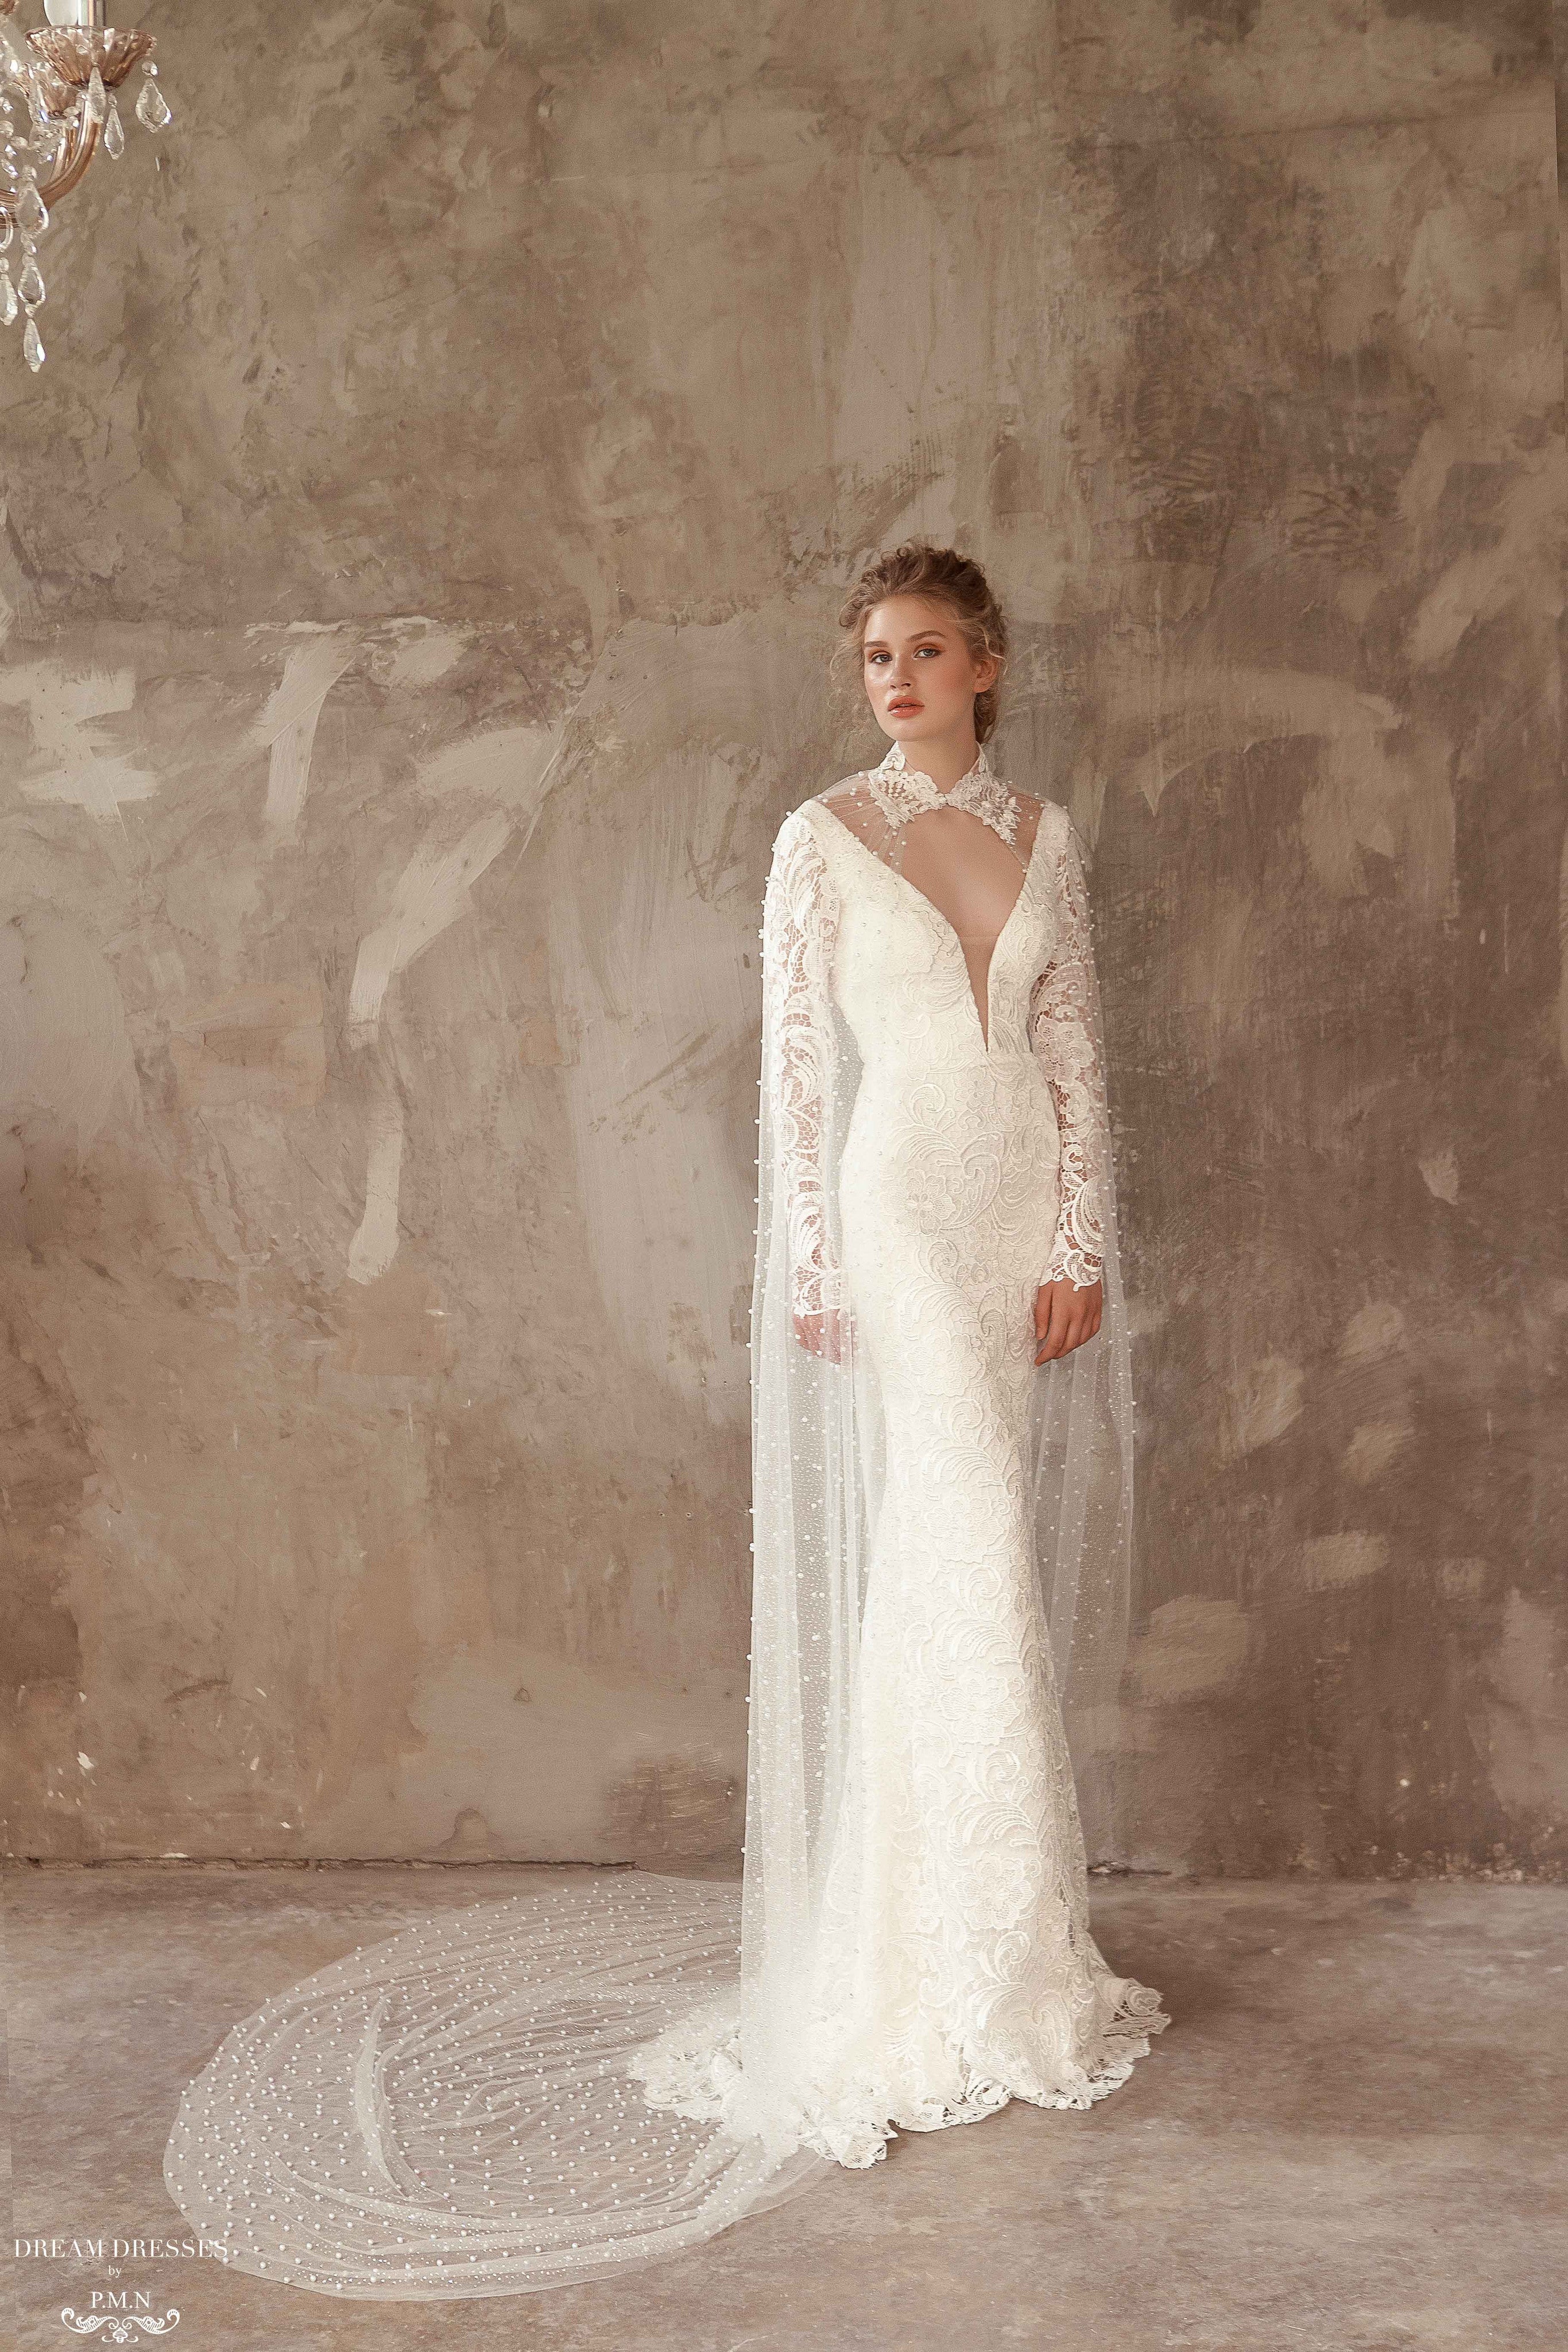 Cathedral Bridal Cape | Dream Dresses by P.M.N | Dream Dresses by P.M.N.